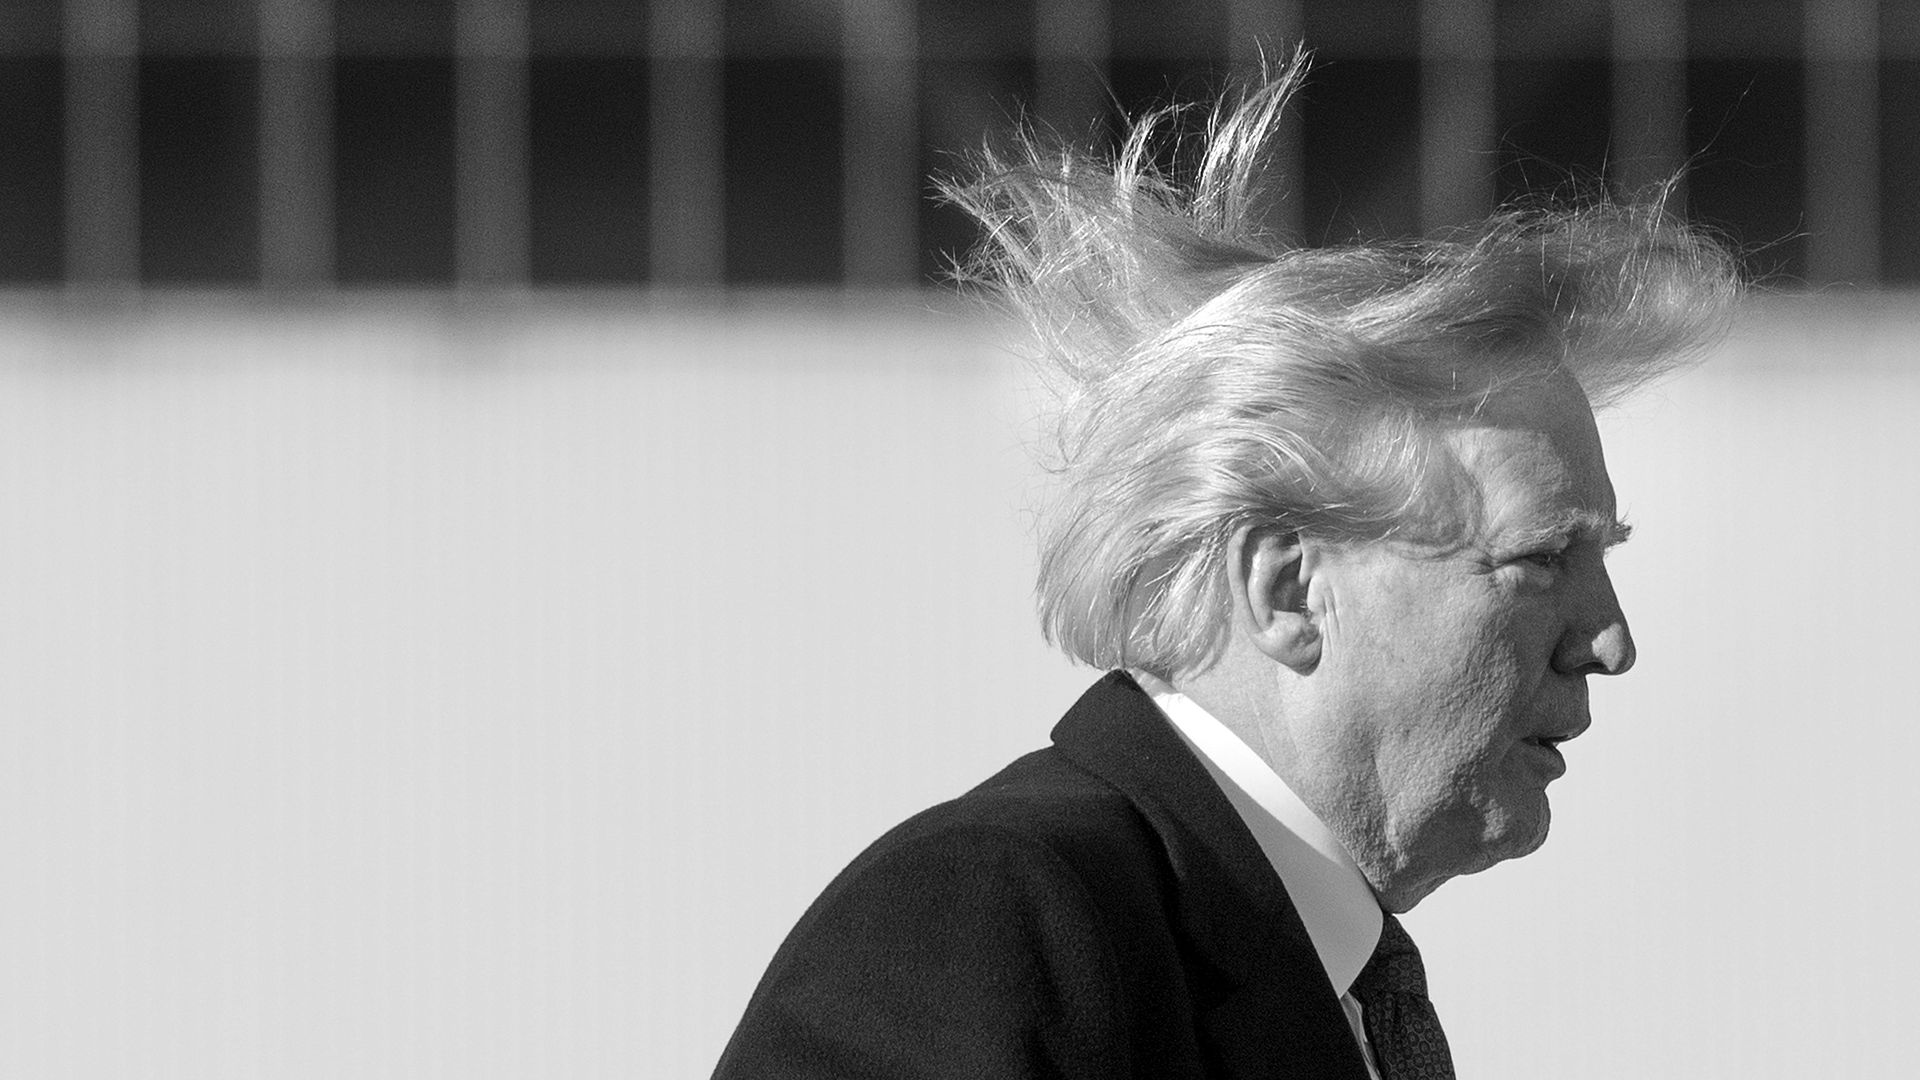 Picture of Donald Trump with his hair flowing in the wind